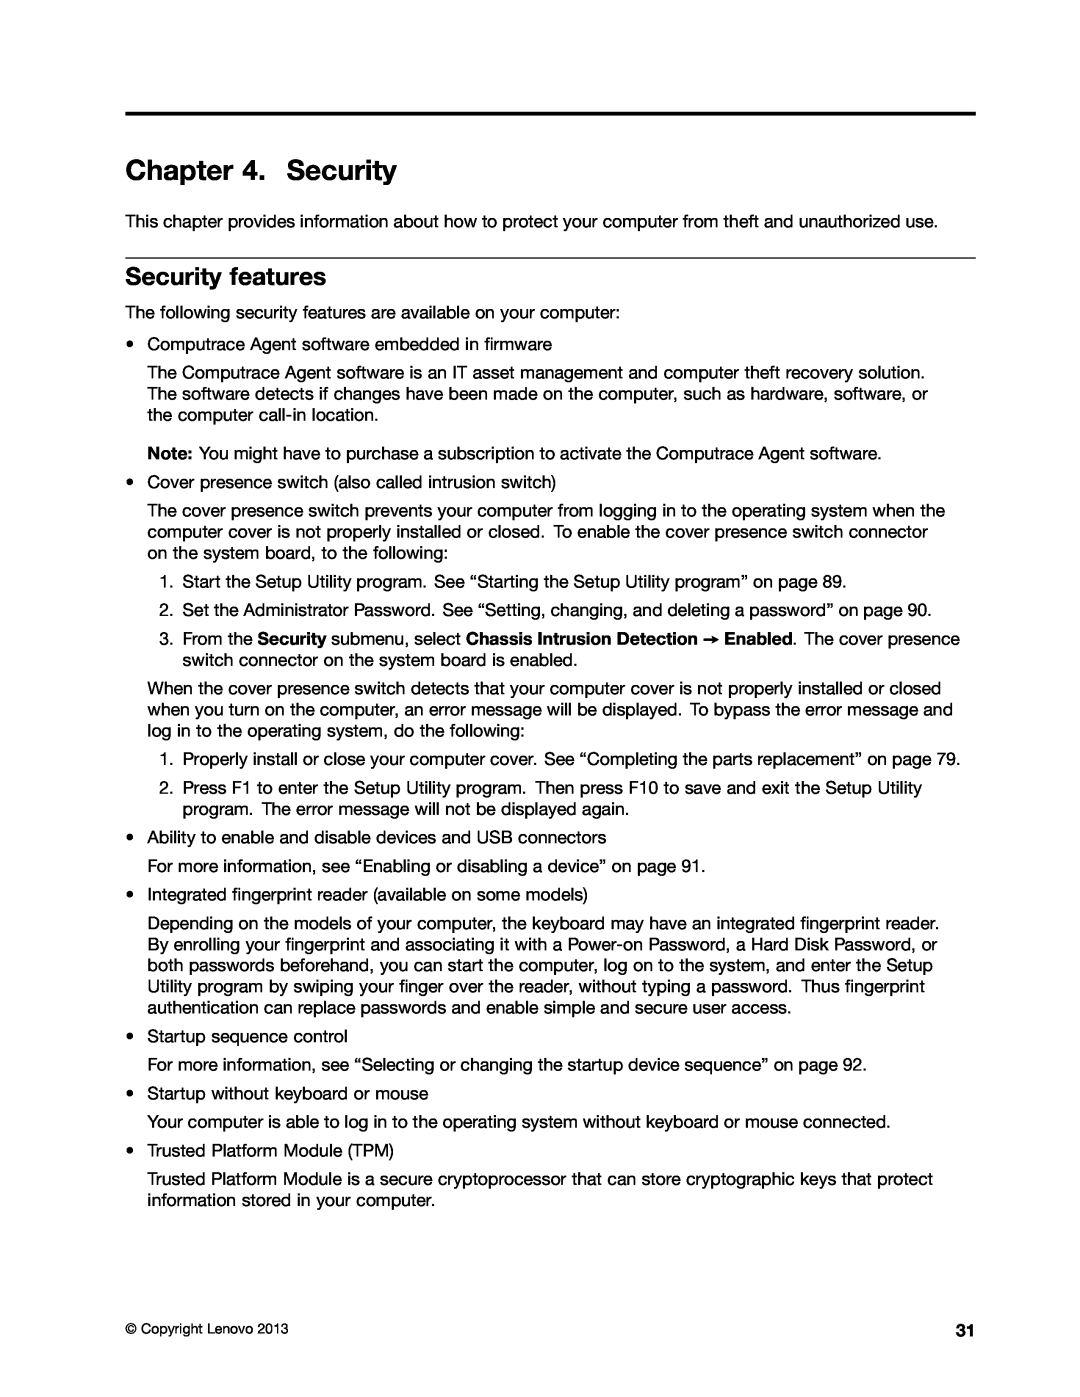 Lenovo M73 manual Security features 